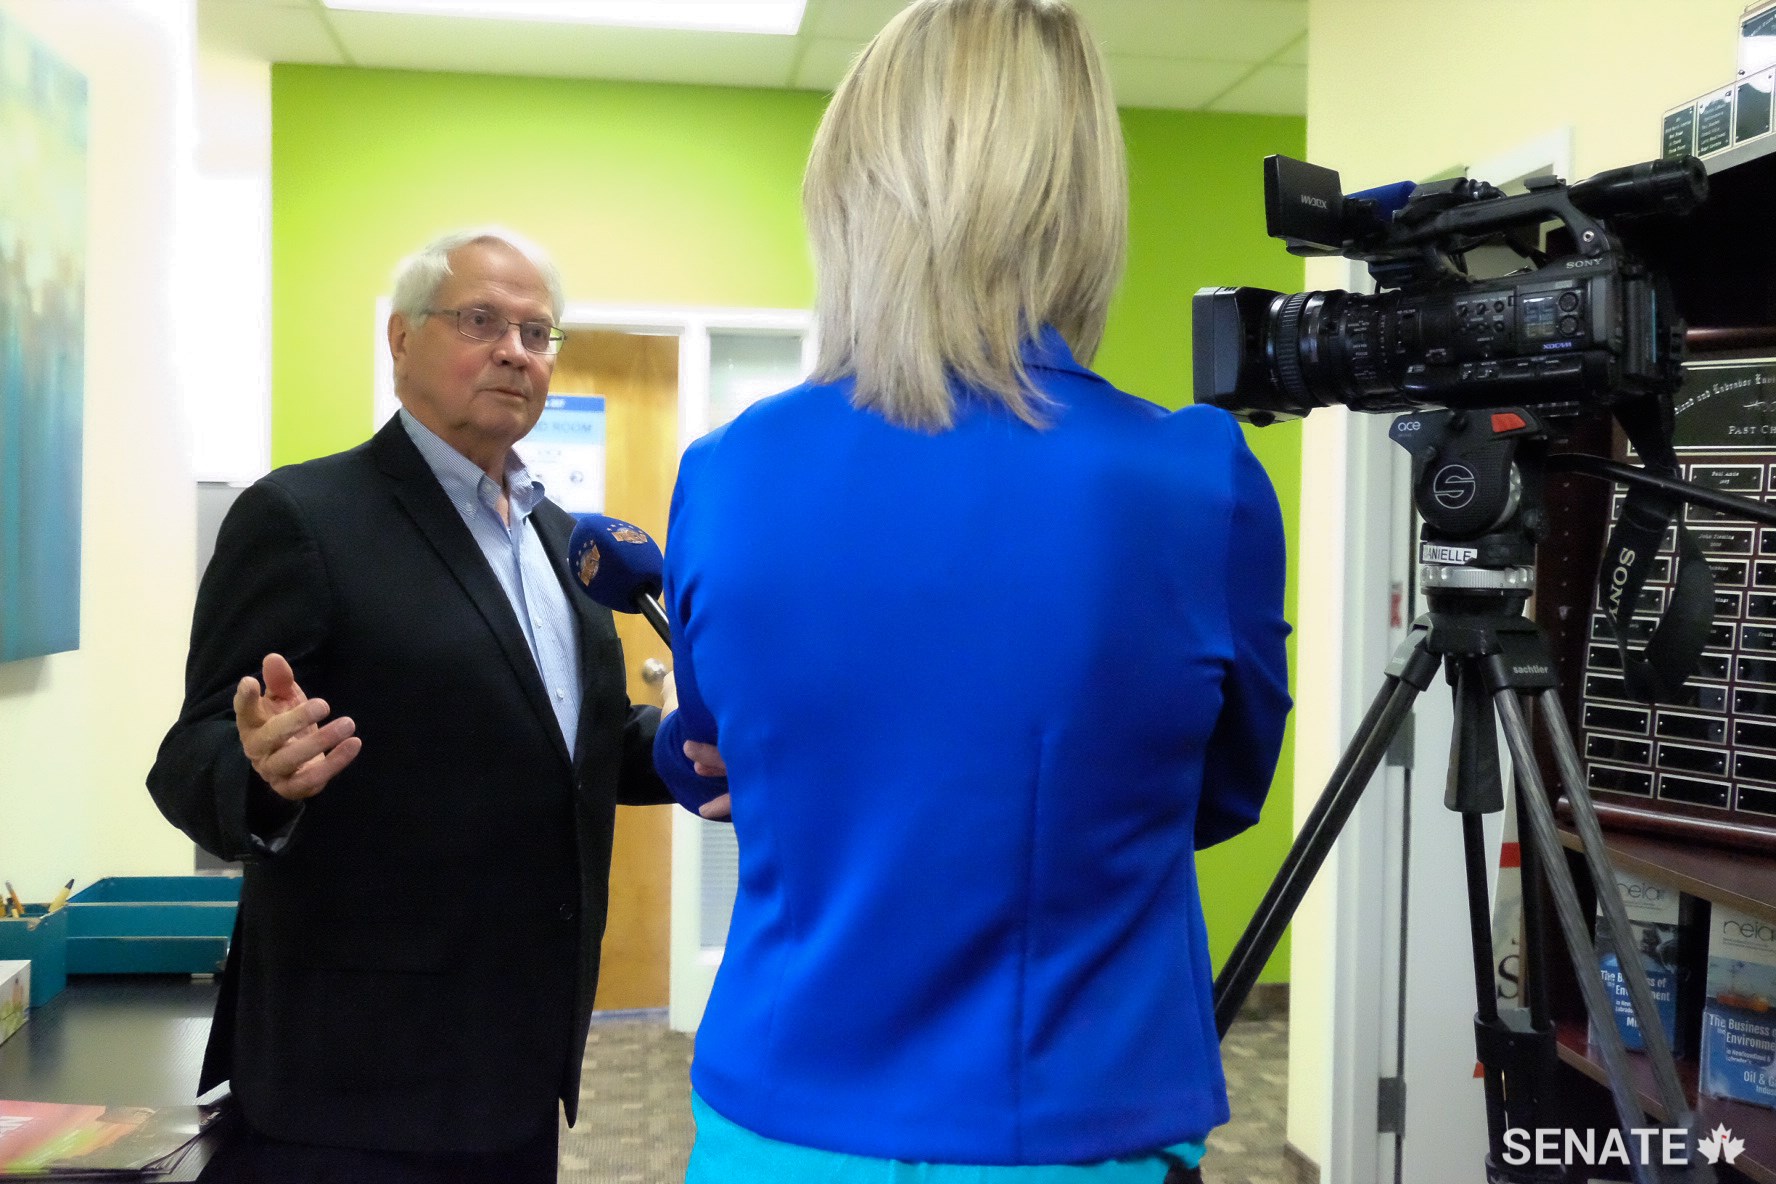 Senator Richard Neufeld gives a media interview as chair of the Senate Committee on Energy, the Environment and Natural Resources during a fact-finding mission on a lower-carbon economy in St-John’s, Newfoundland, in May 2017.